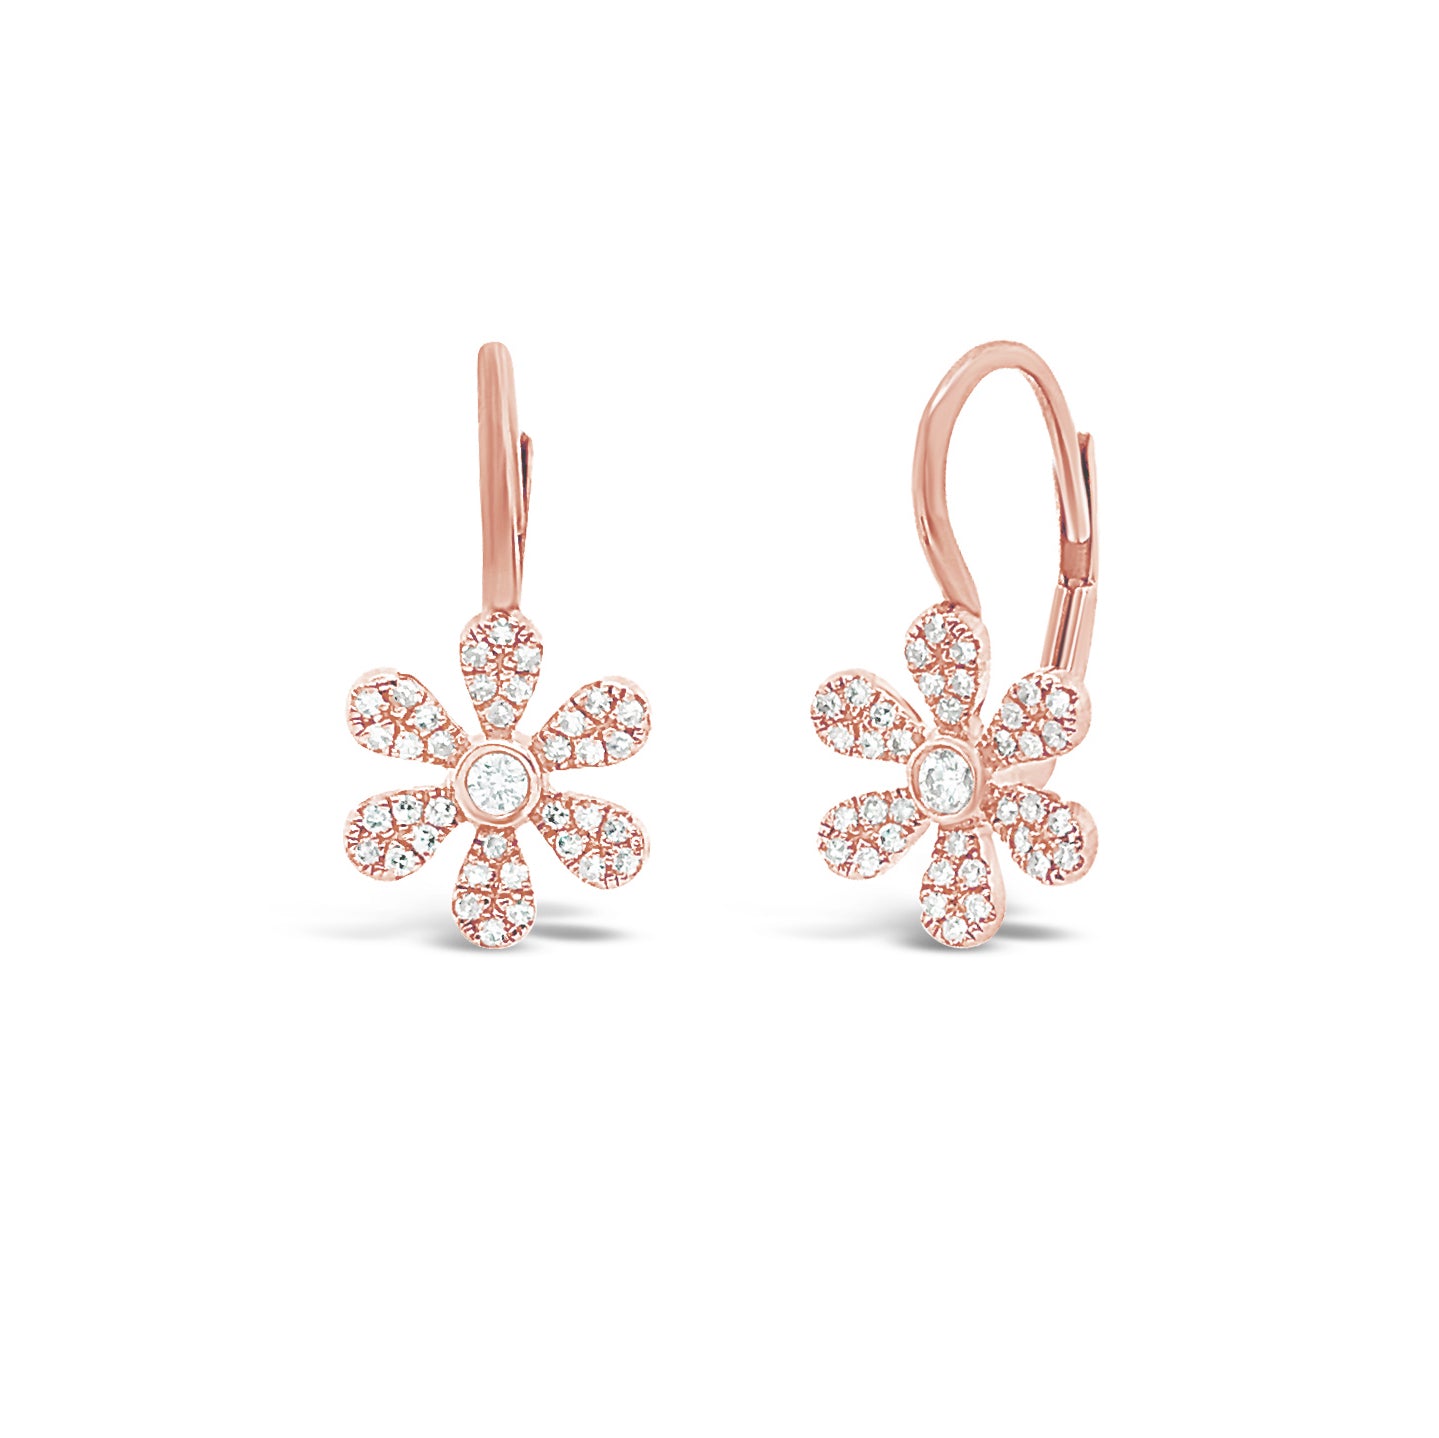 Diamond Flower Lever-Back Earrings  -14K gold weighing 1.85 grams  -74 round pave-set diamonds totaling 0.23 carats